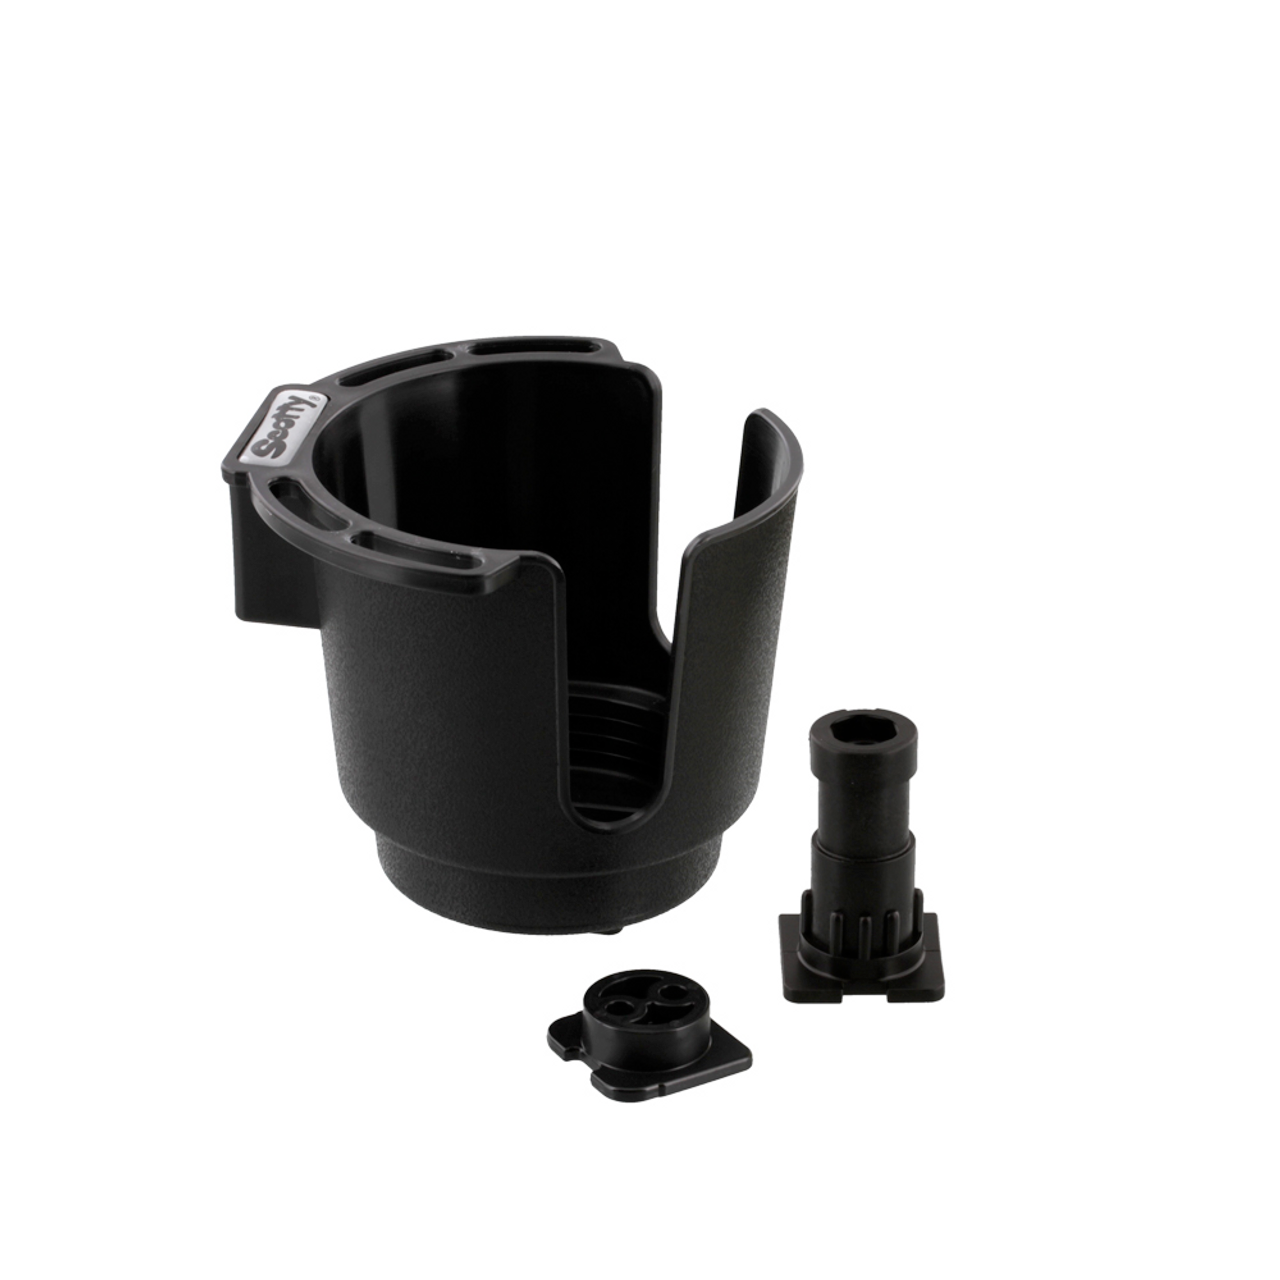 Scotty Cup Holder with Button Mount & Rod Holder Post Mount, Black